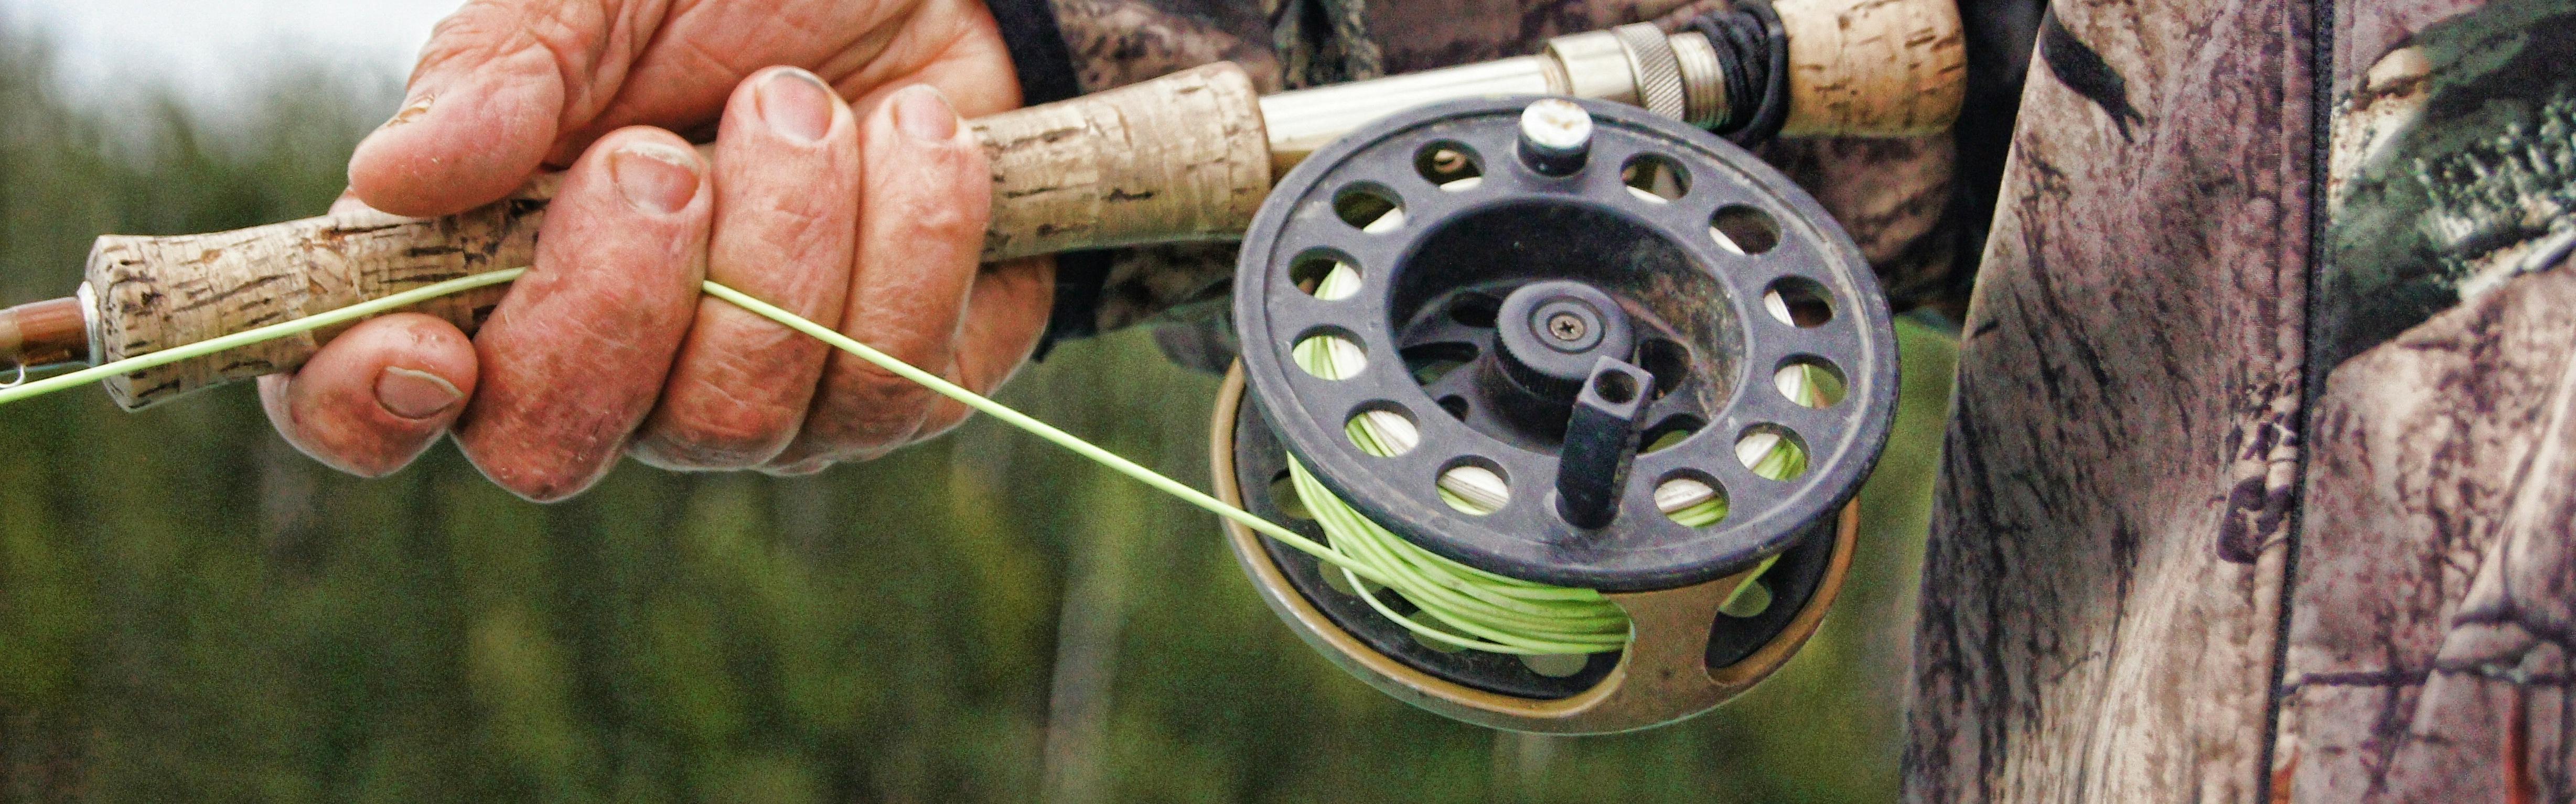 How to tie fishing line to reel, fishing net in a smsll river look at the  result ! fishing nets 1 